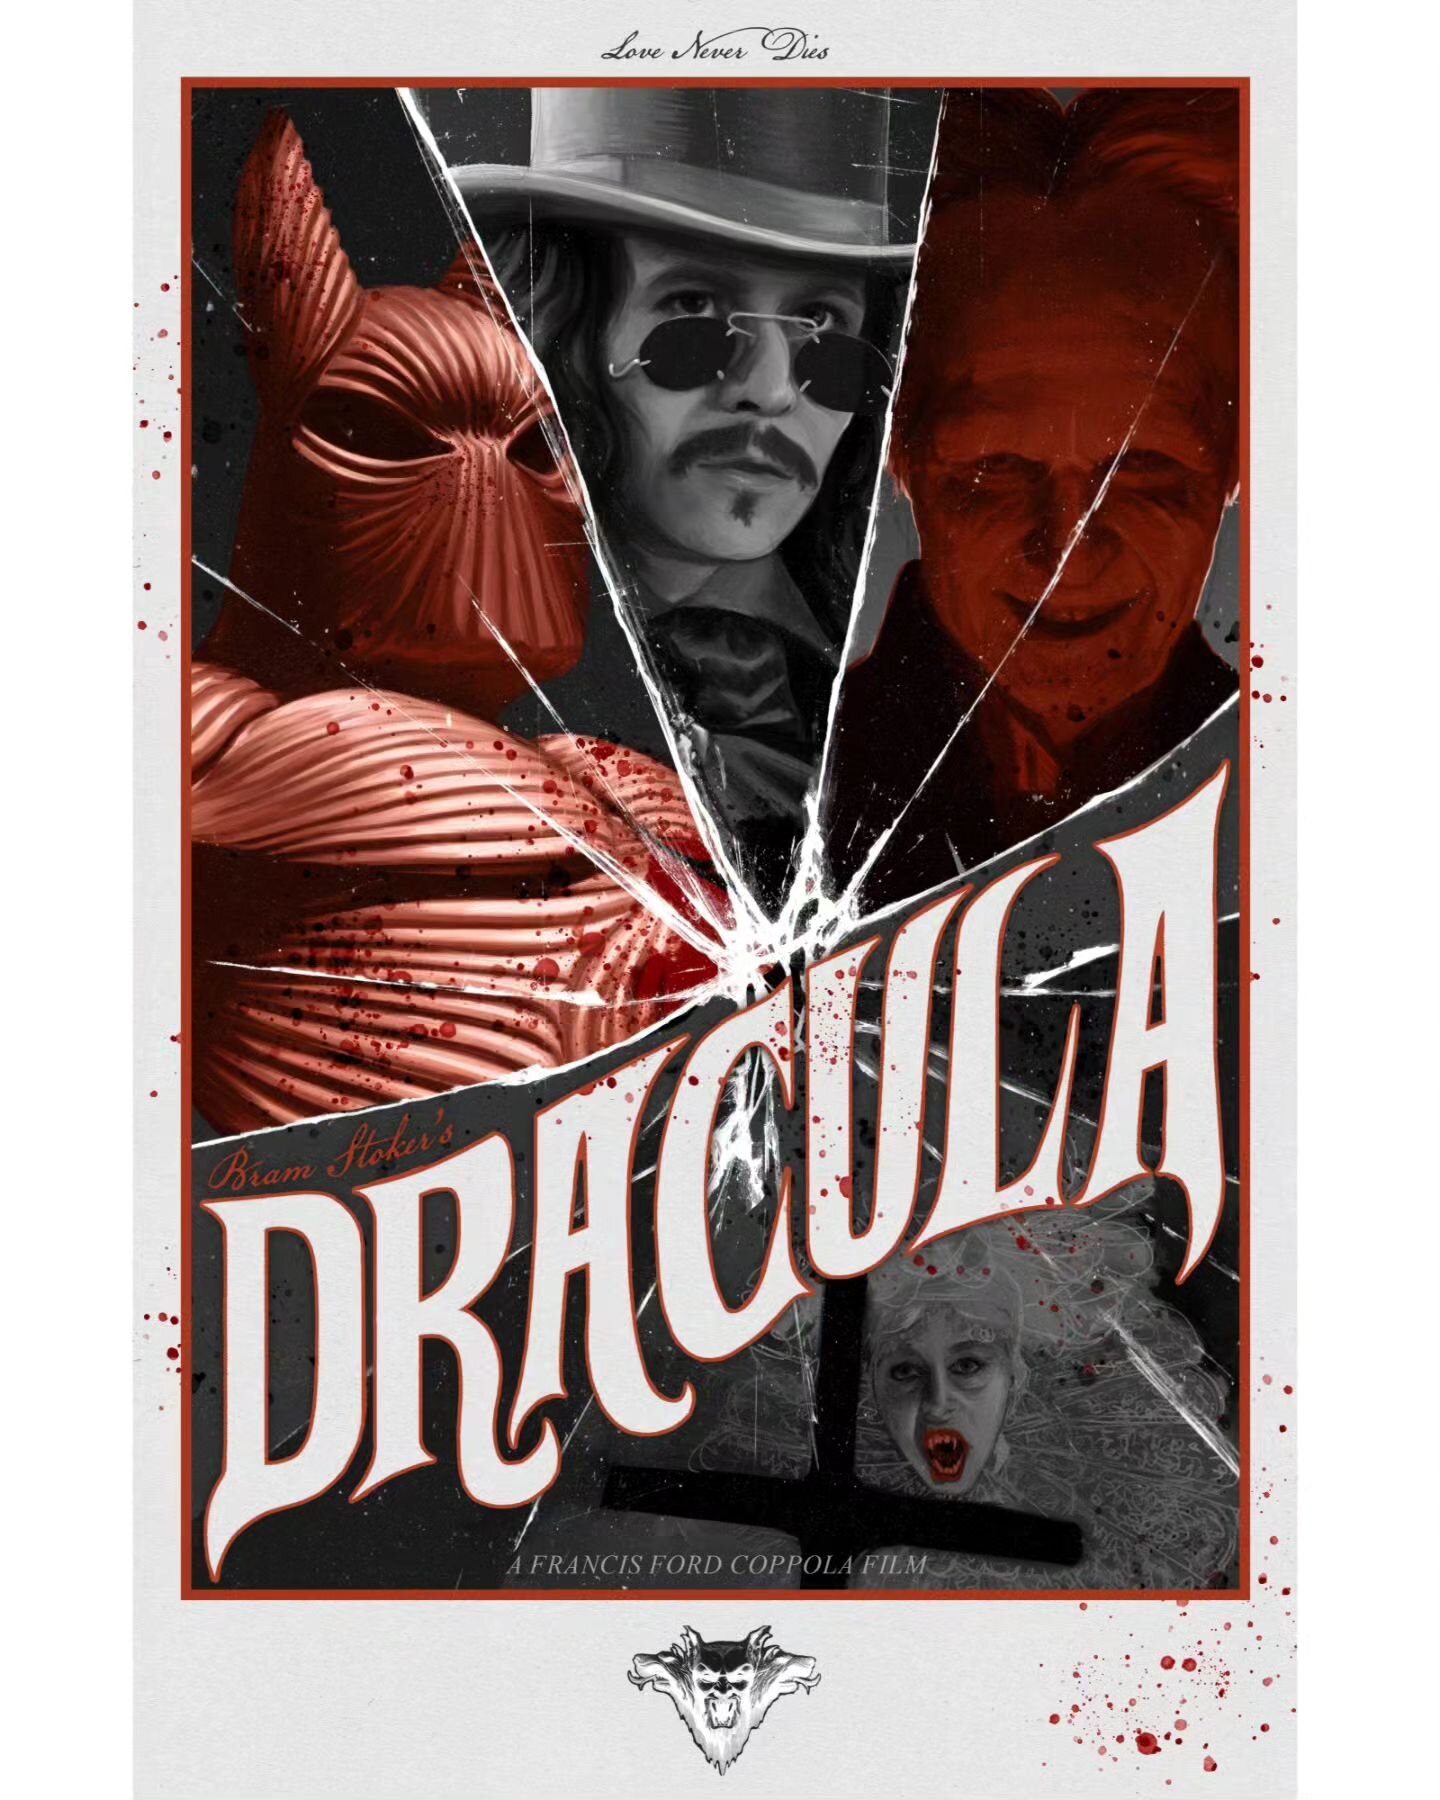 On this day in 1992, this dizzying masterpiece was released and the world was never the same! Bram Stoker's Dracula is one of the most influential movies for me as both an artist and a person. I'm very sure this is the movie that sparked my eternal l